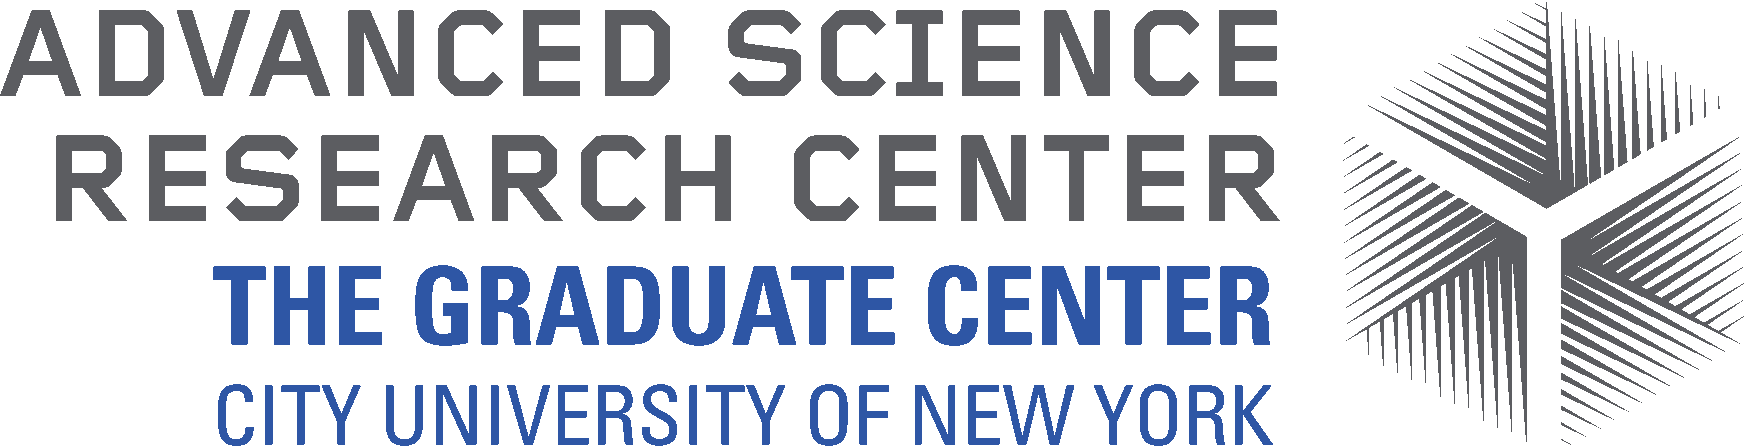 Advanced Science Research Center